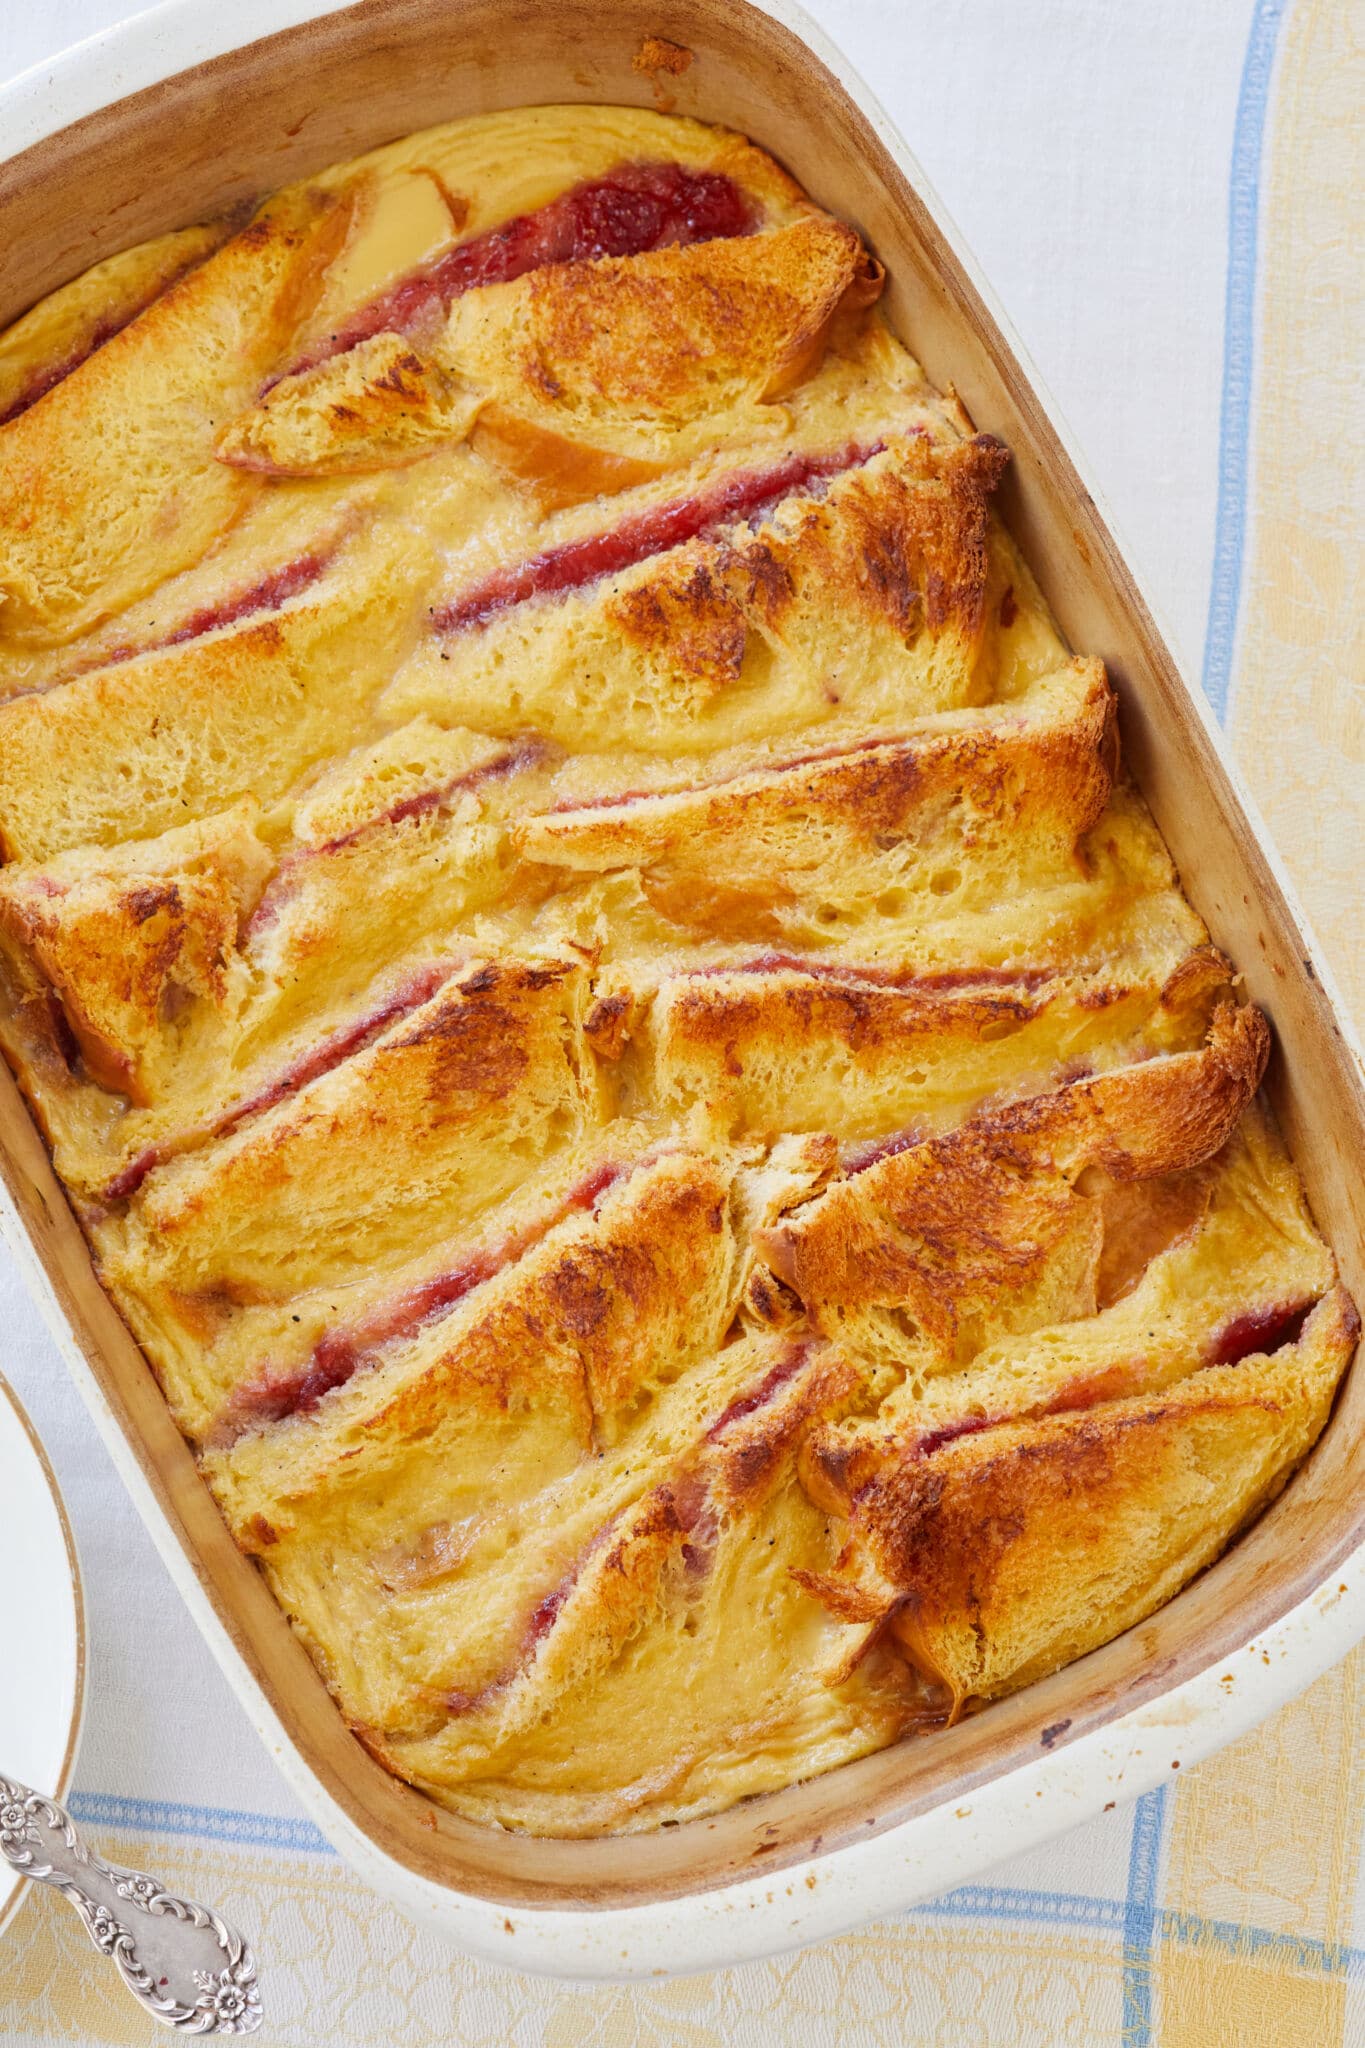 Butter and Jam Bread Pudding is baked to perfection in the whited baking dish. It has a golden-brown and slightly crispy top, glistening with melted butter from the base and vibrant red strawberry jam between slices of the brioche. The rich velvety custard is visible around edges.